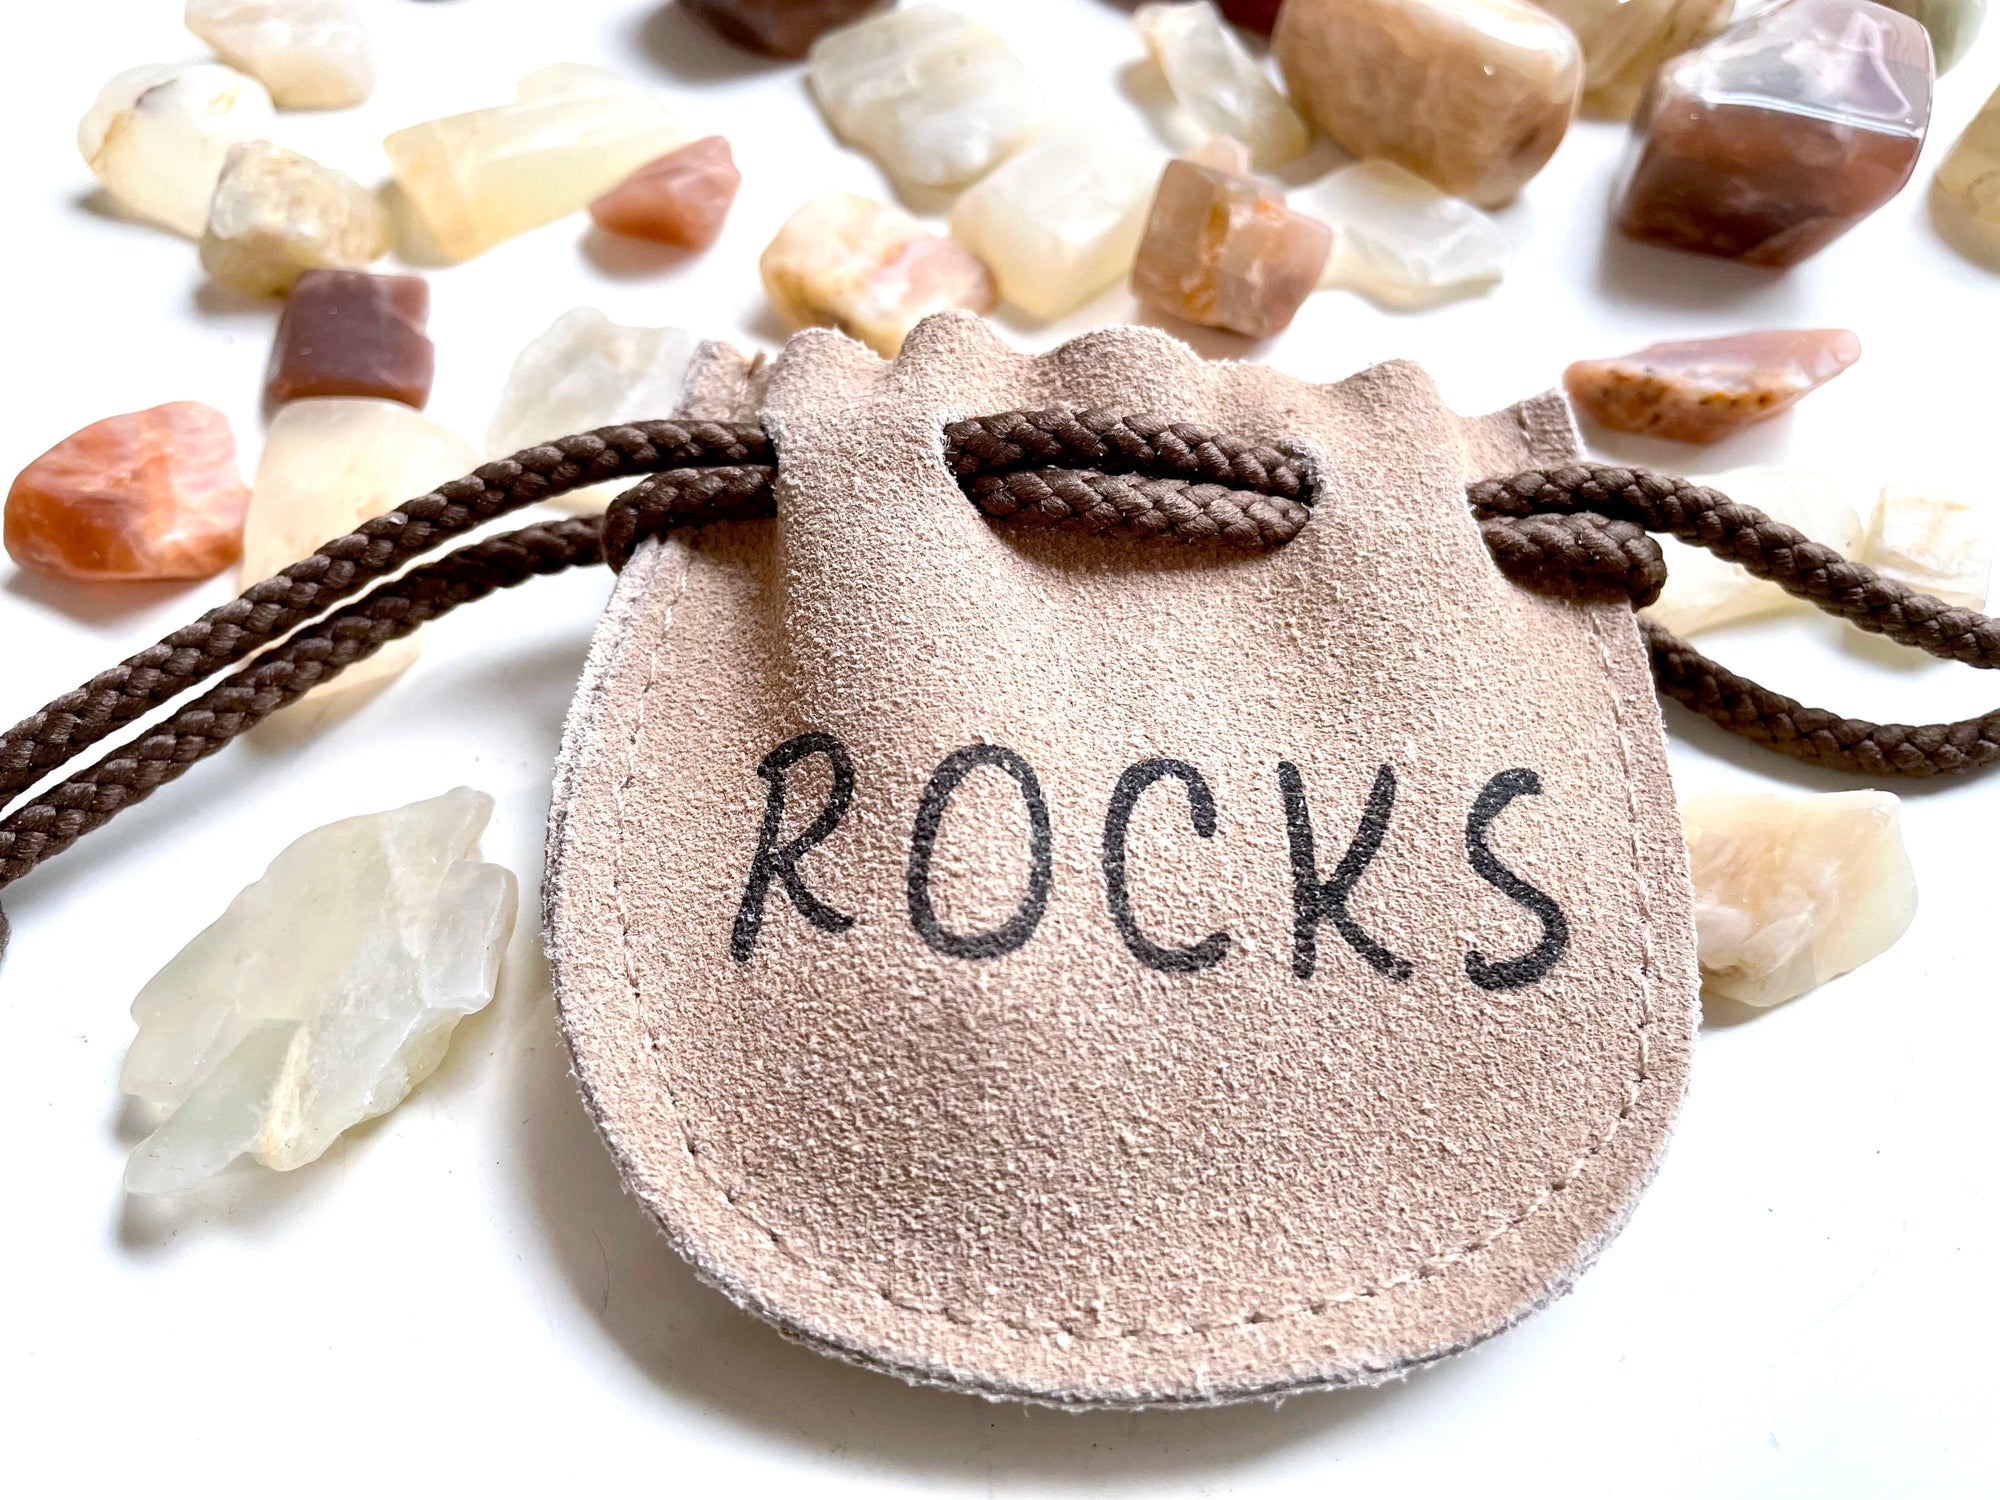 Leather "Rocks" Pouch